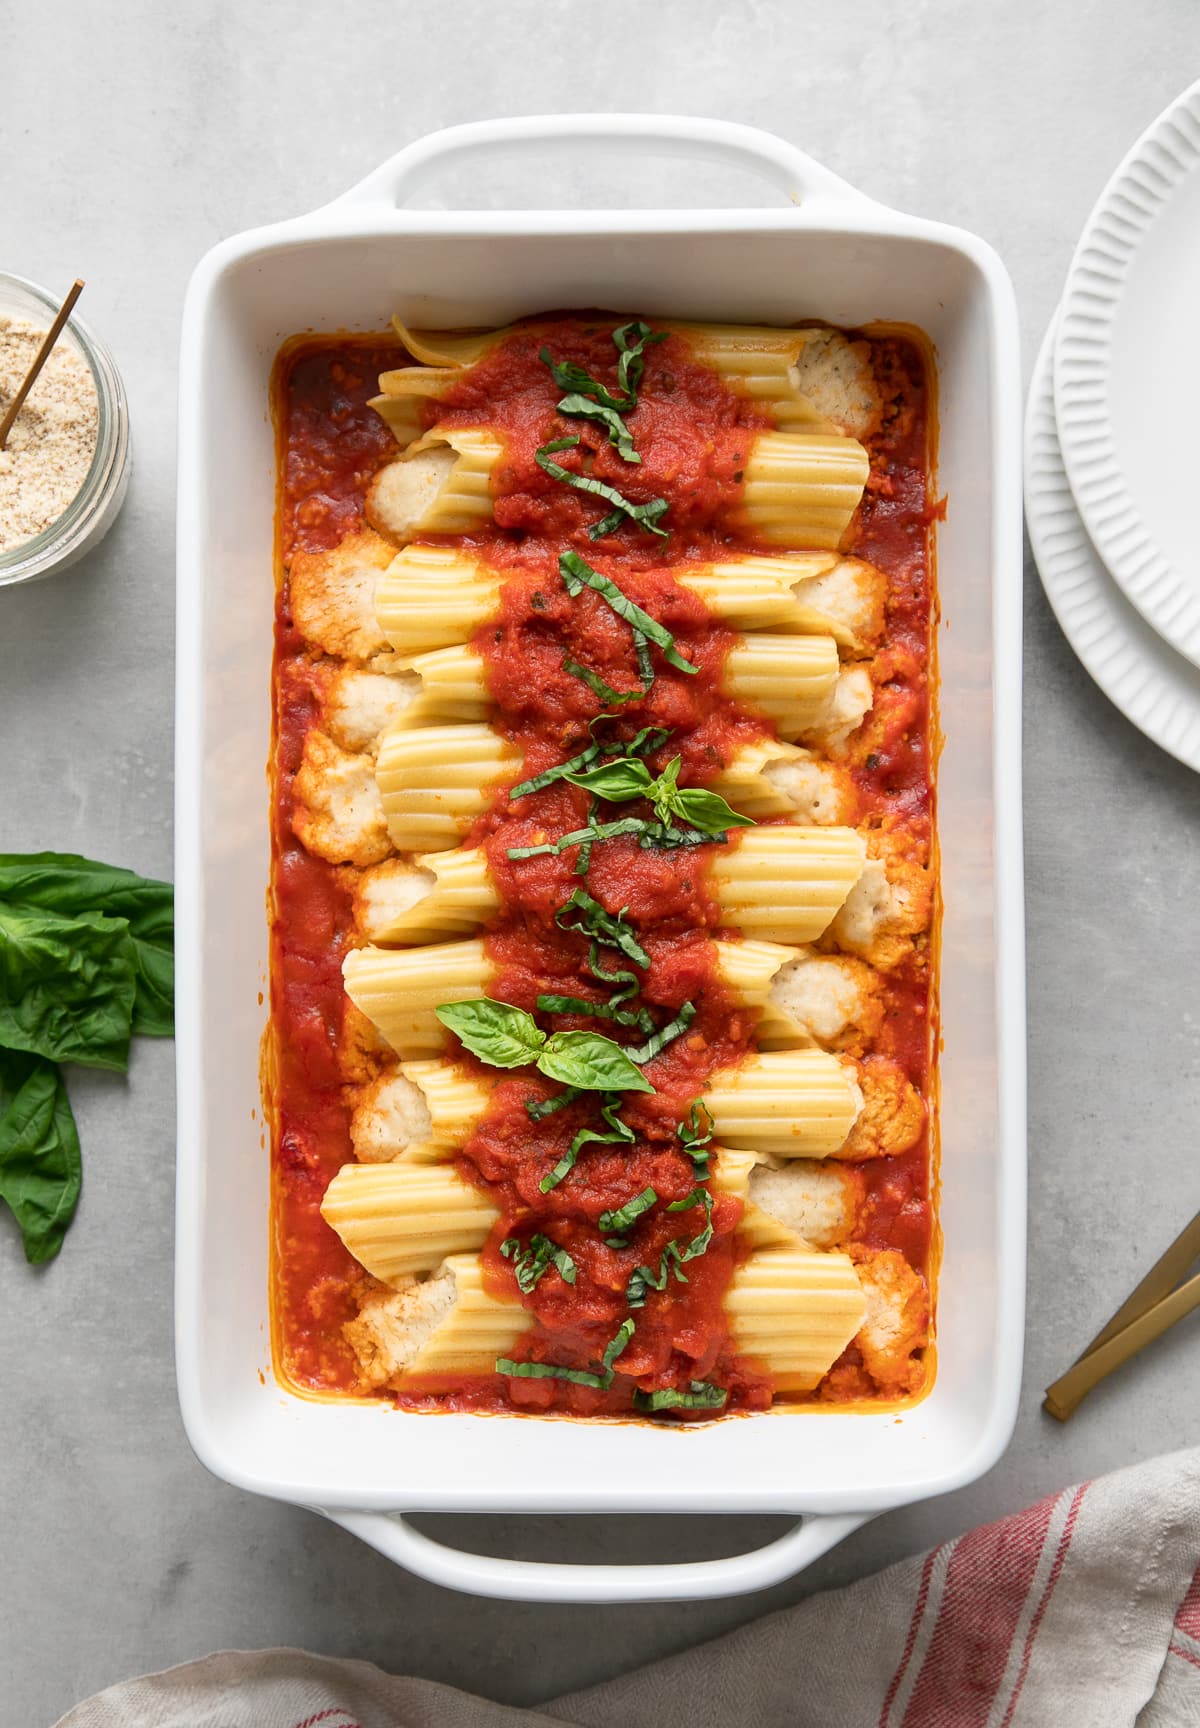 top down view of freshly baked vegan manicotti in a baking dish with items surrounding.